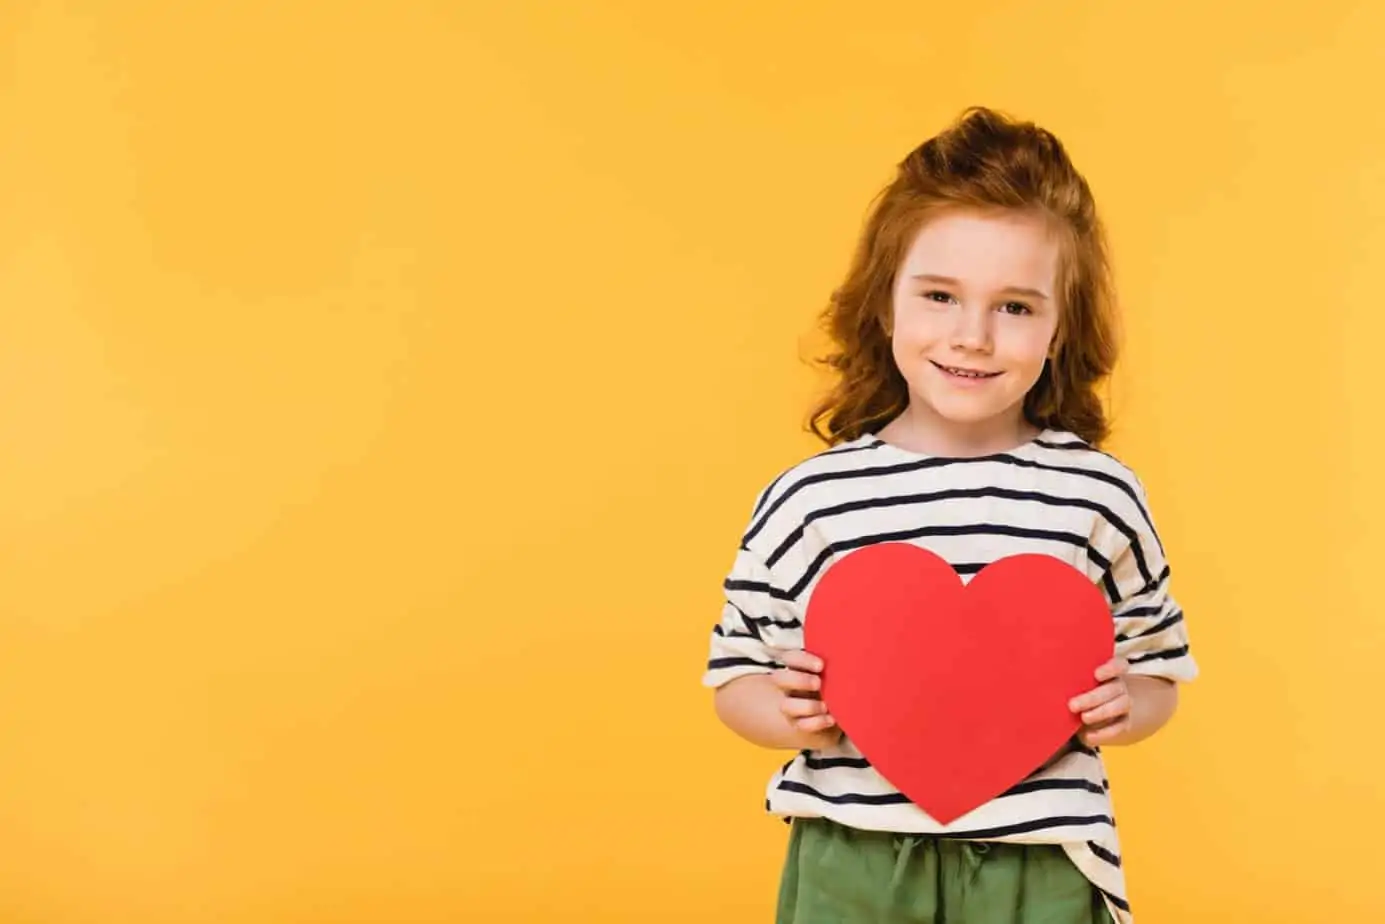 4 printable heart template forms for Valentines Day. Plus, 7 ideas how to use the heart cut out templates with your family, and to share love with others. 